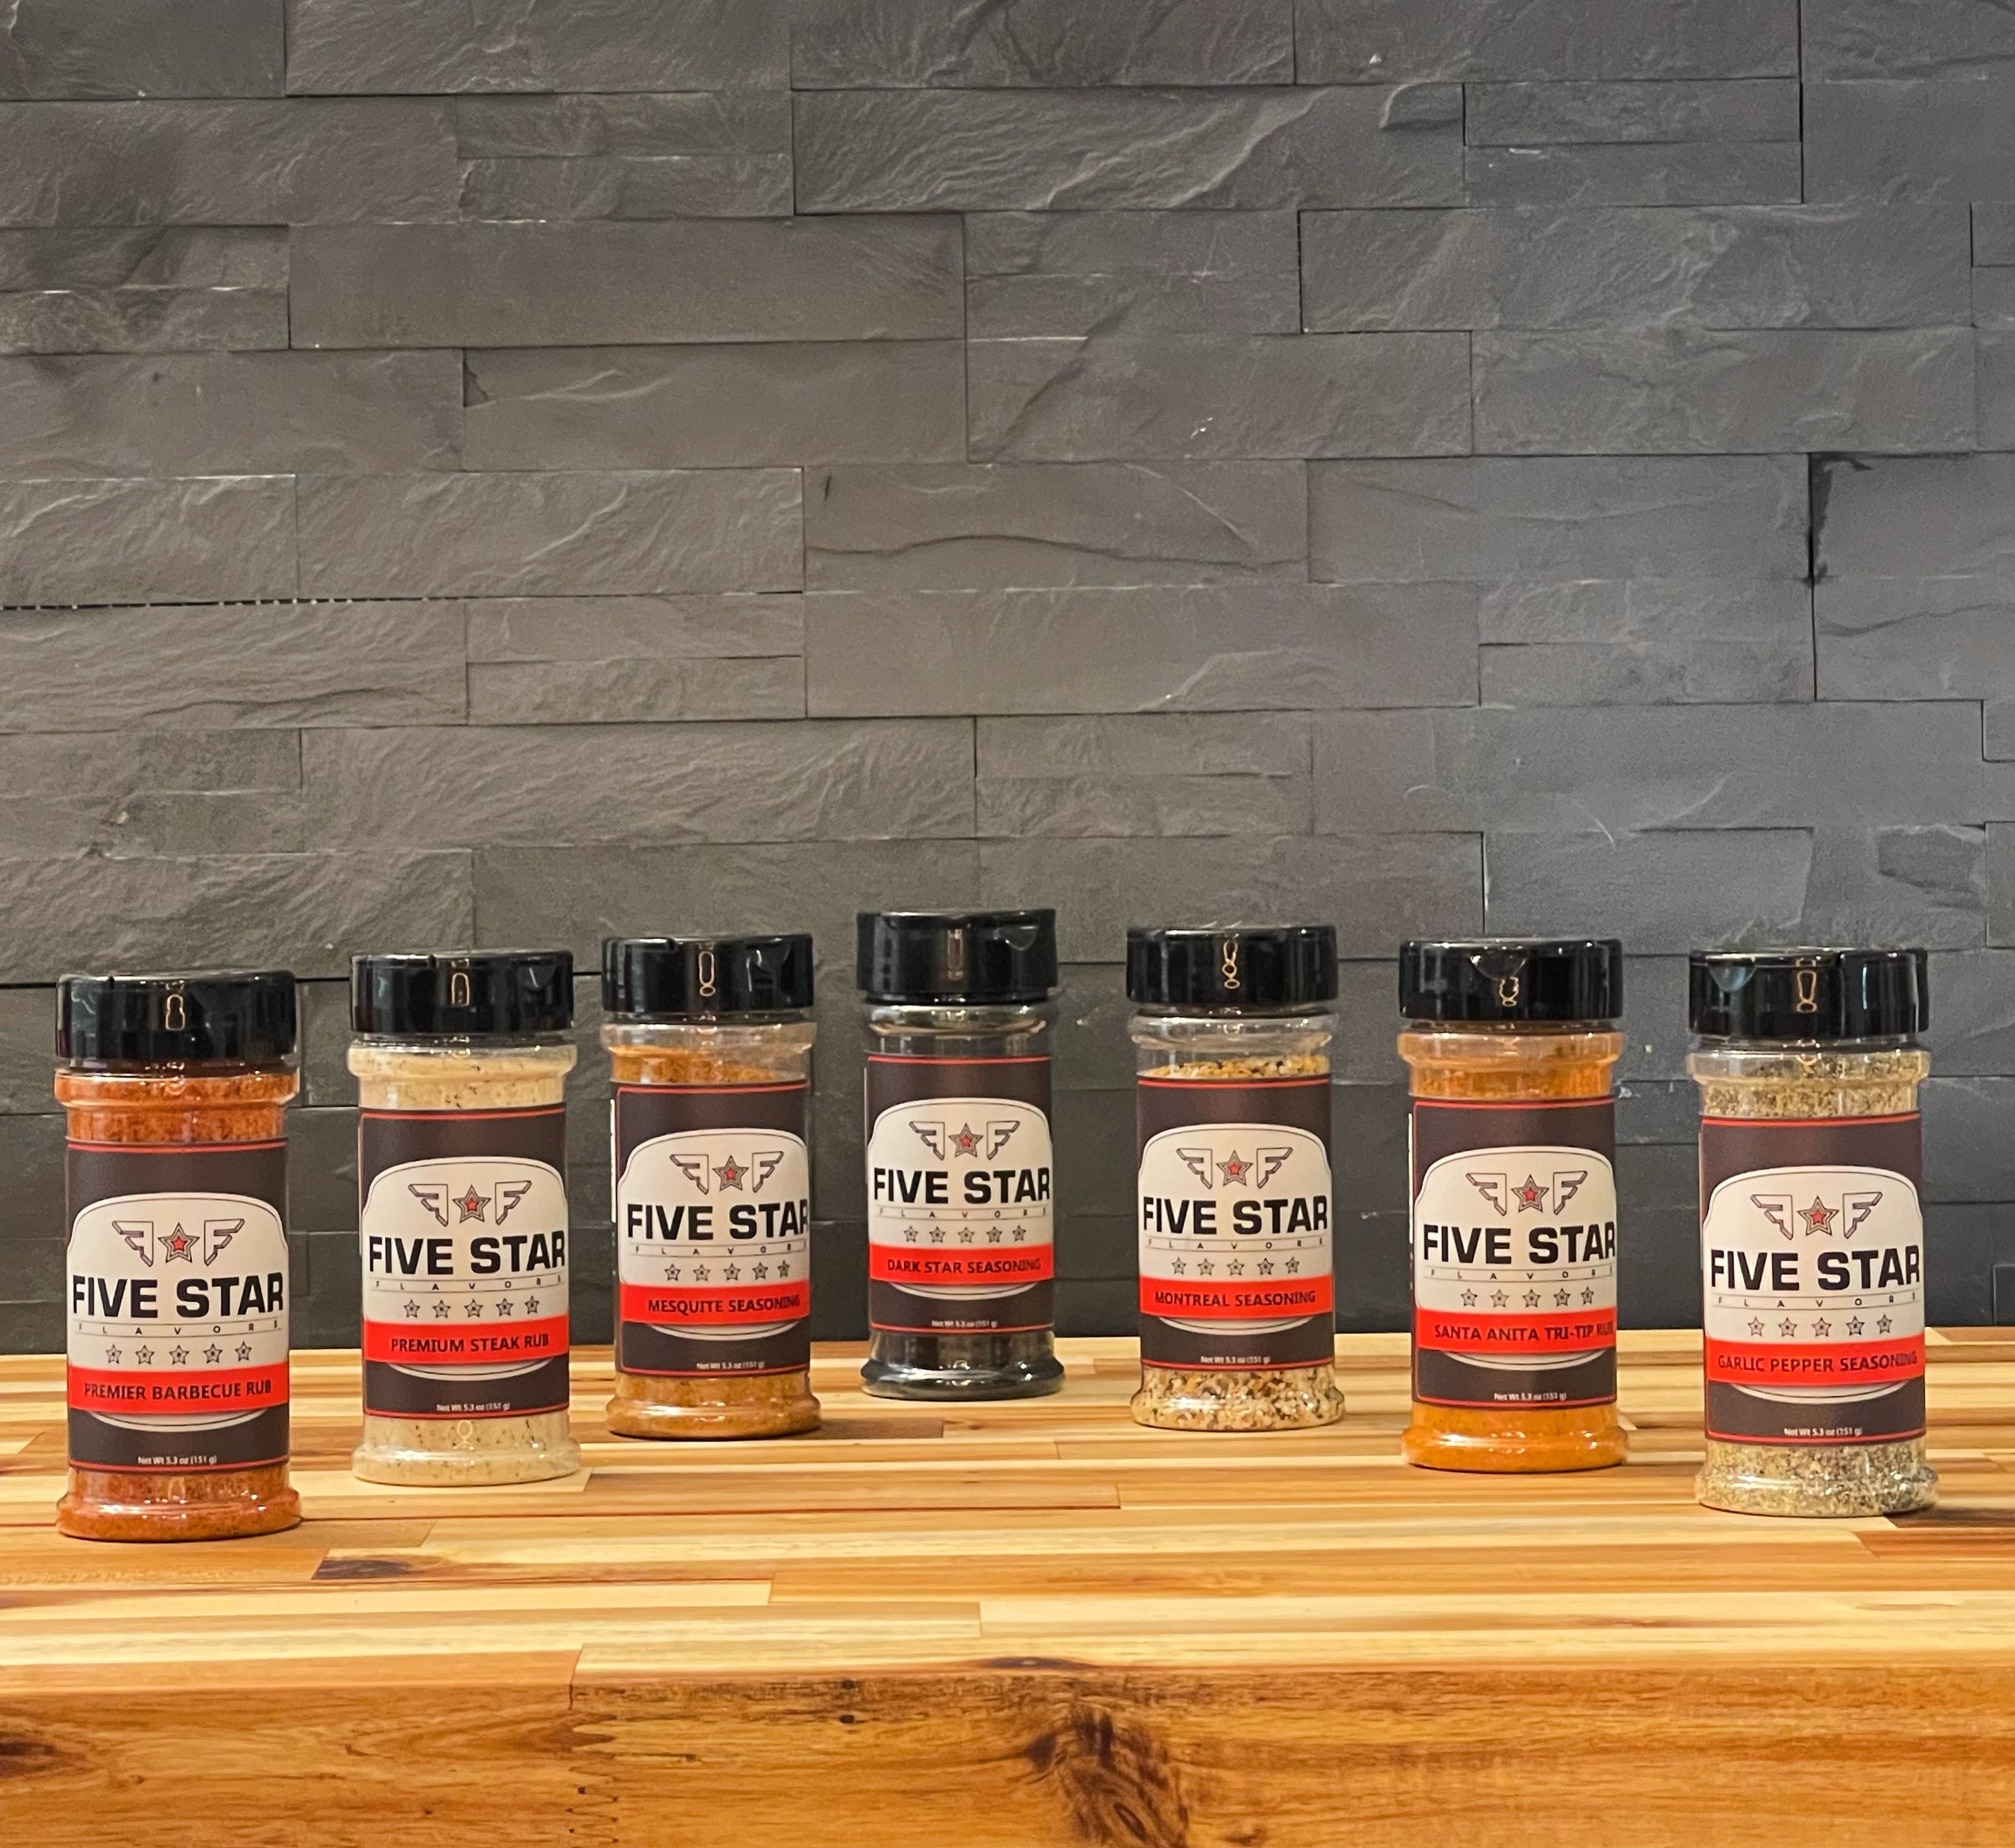 Deluxe Steak & Beef BBQ Seasonings Collection - 3 Pack | Bougie BBQ | Gourmet Seasoning Pack | Artisanal Spice Blends | All Natural, No MSG, Fillers